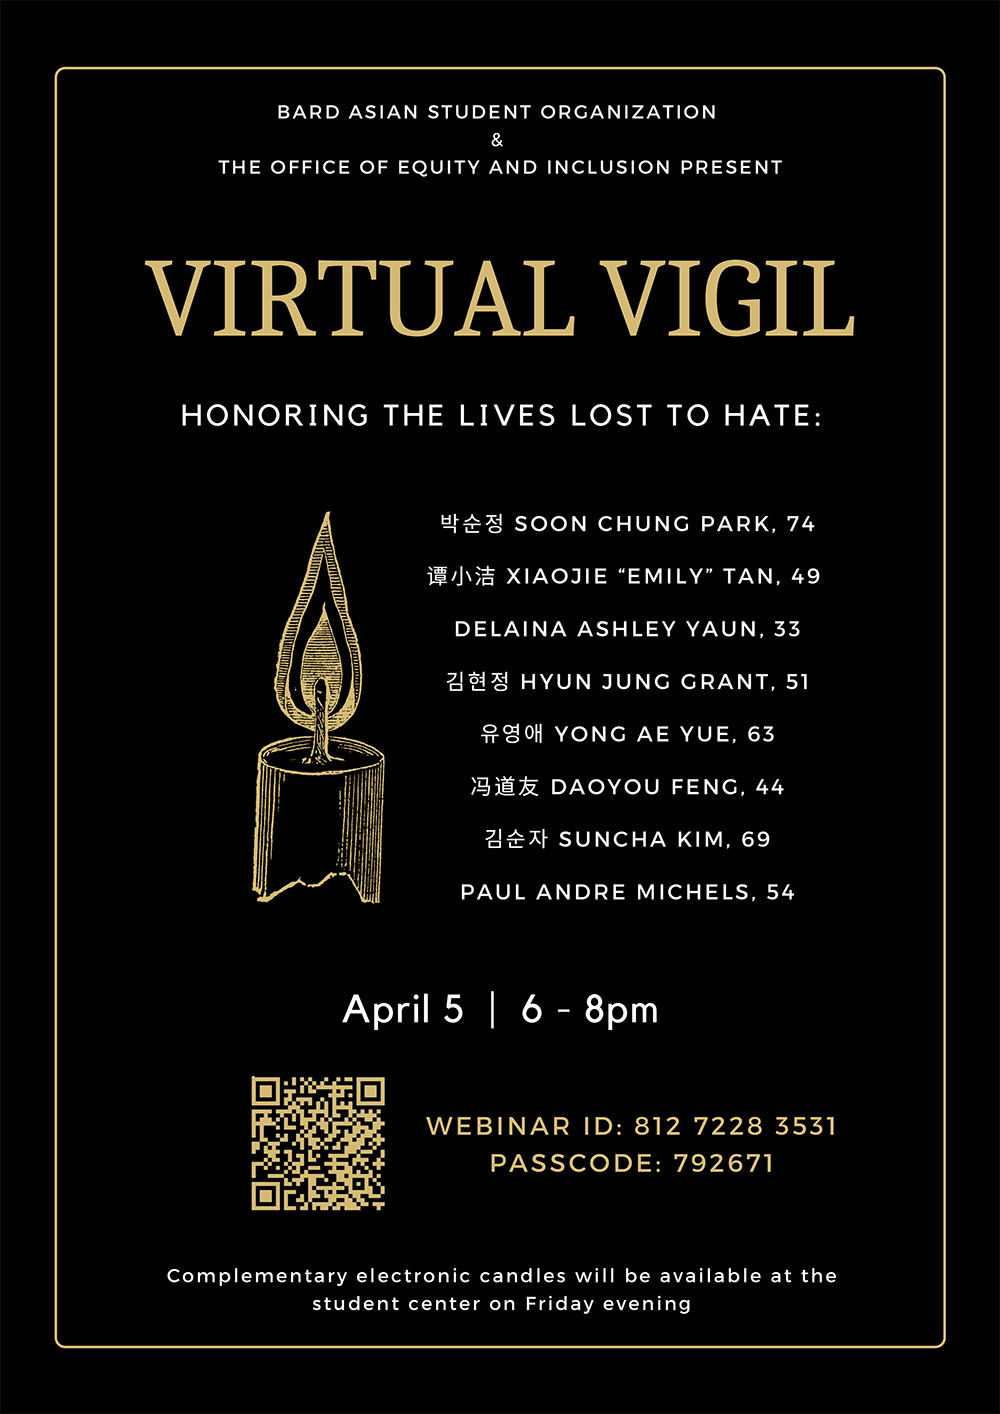 Virtual Vigil Honoring the Lives Lost to Hate